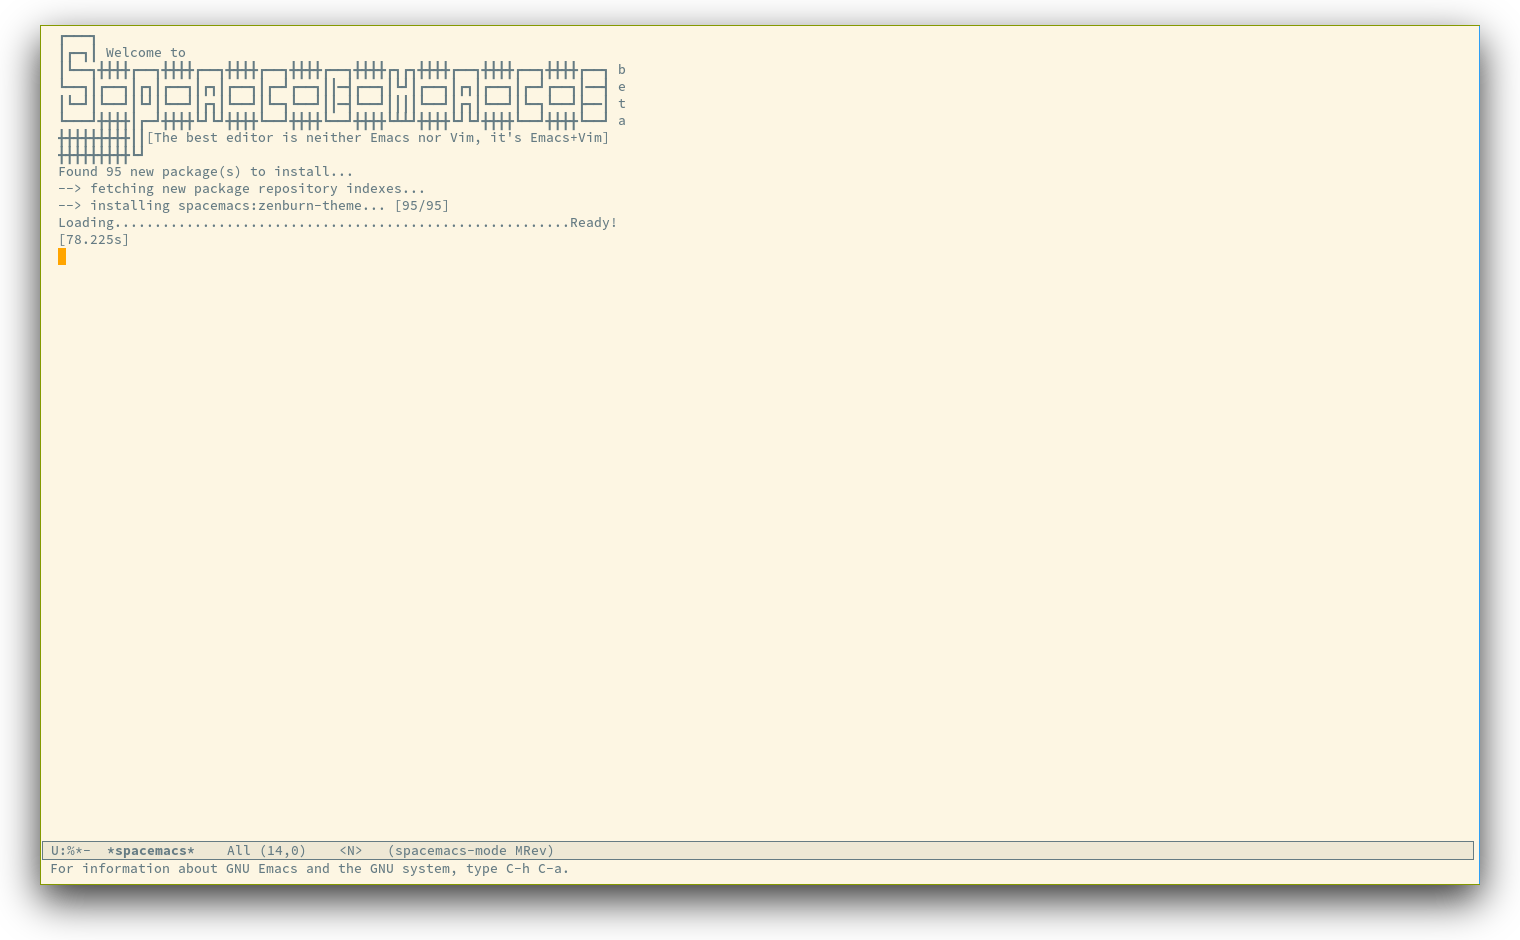 /TakeV/spacemacs/media/commit/40ee152865996b518dd9acc2b90141065210ba9b/doc/img/spacemacs-startup.png